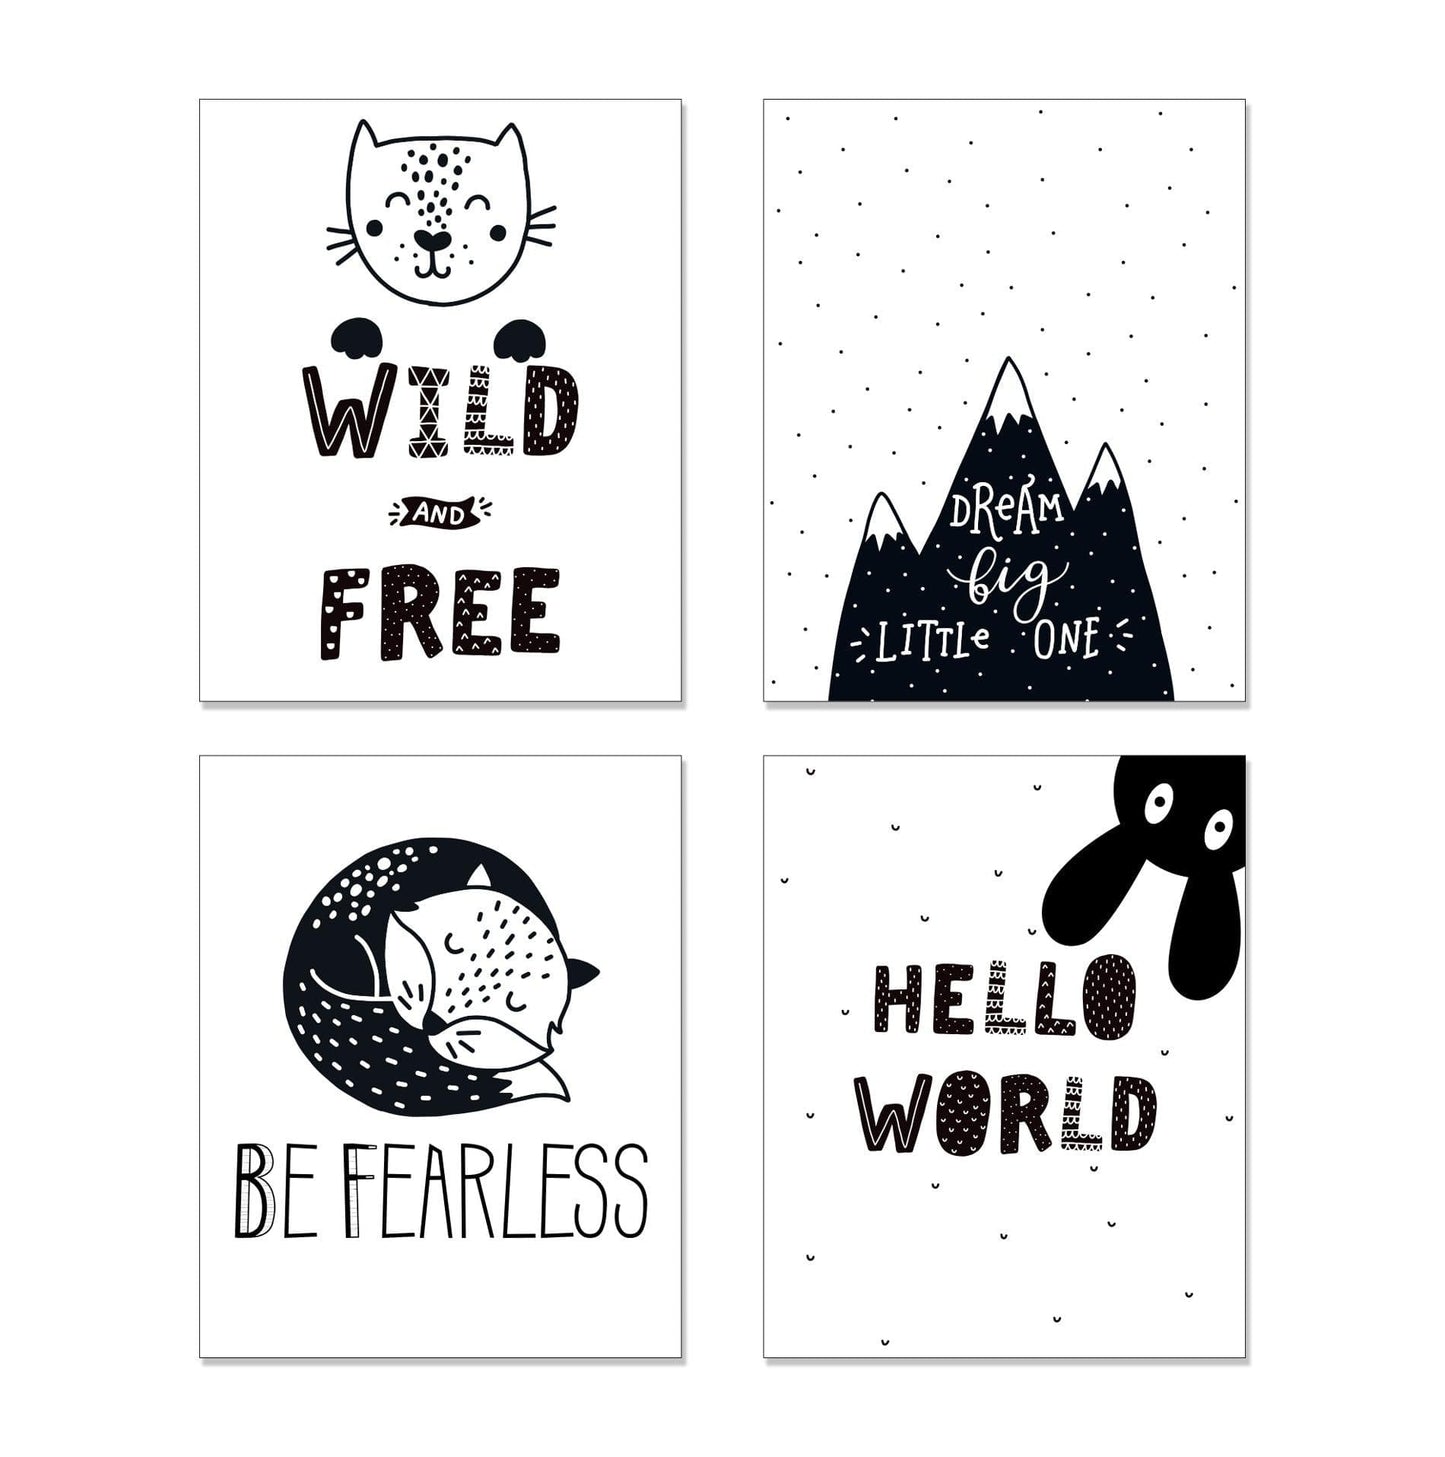 Cute Nursery Room Poster Quotes. Be Fearless. Wild and Free. Dream Big Little One. Hello World. #P1015